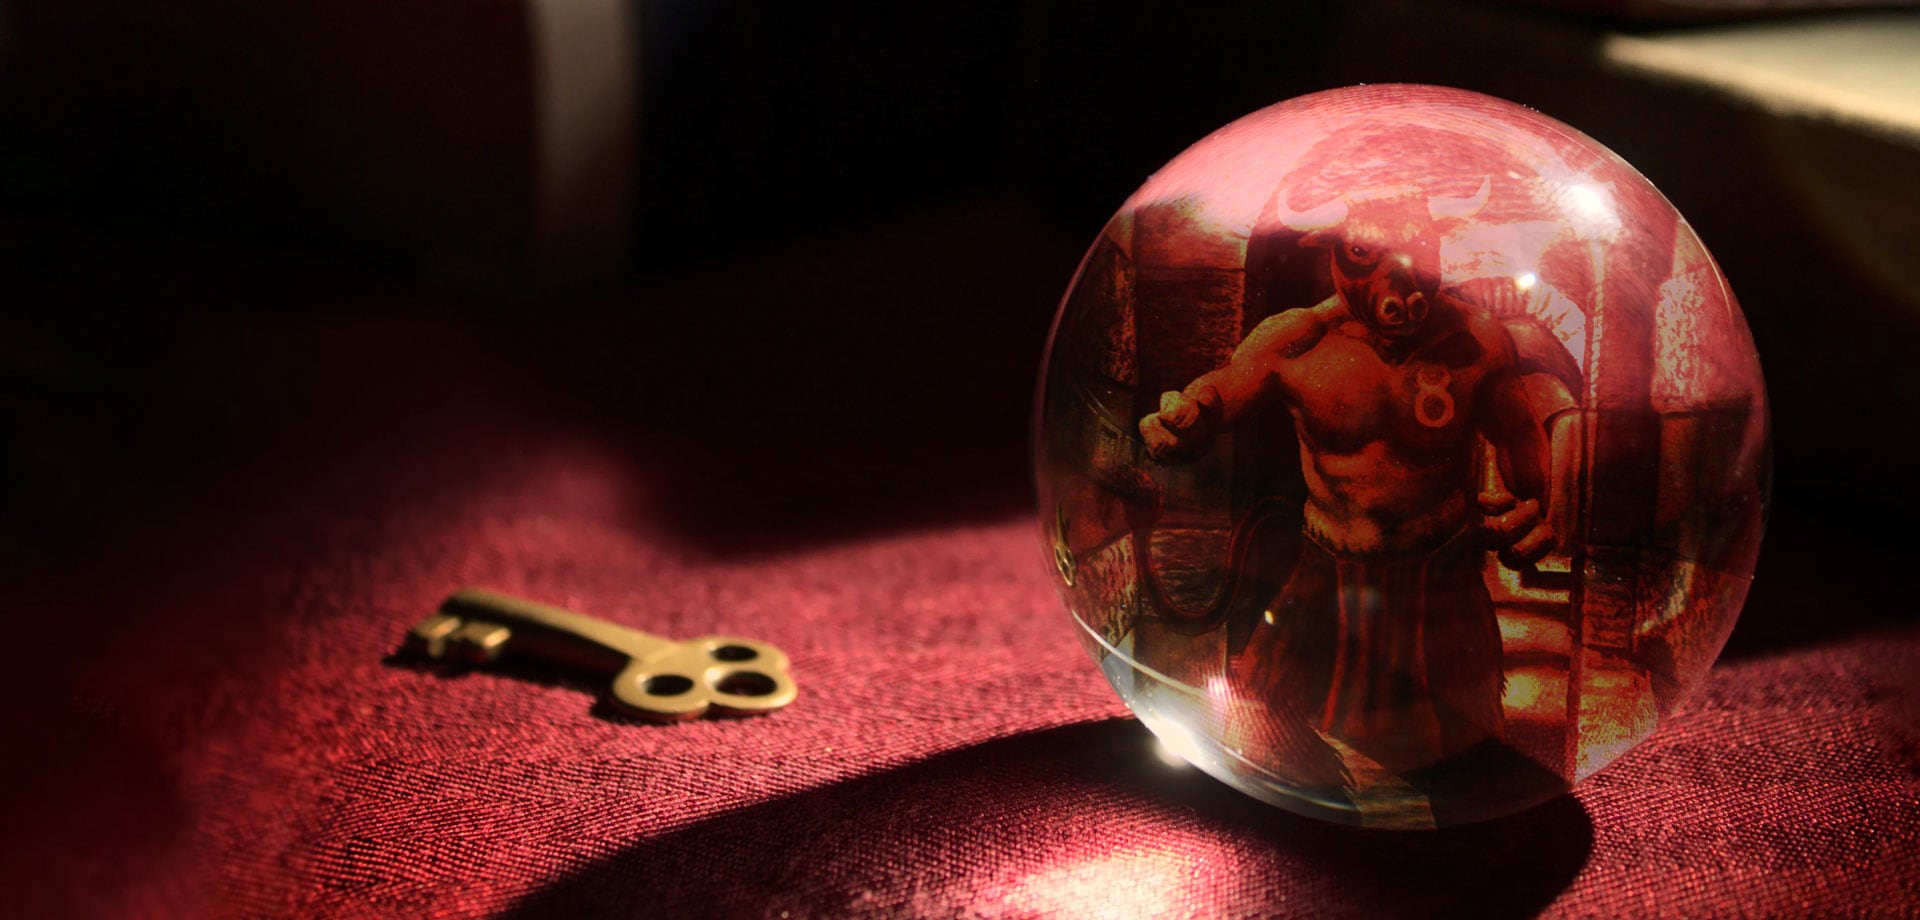 MANTIC MINOTAUR crystal ball with a minotaur in it